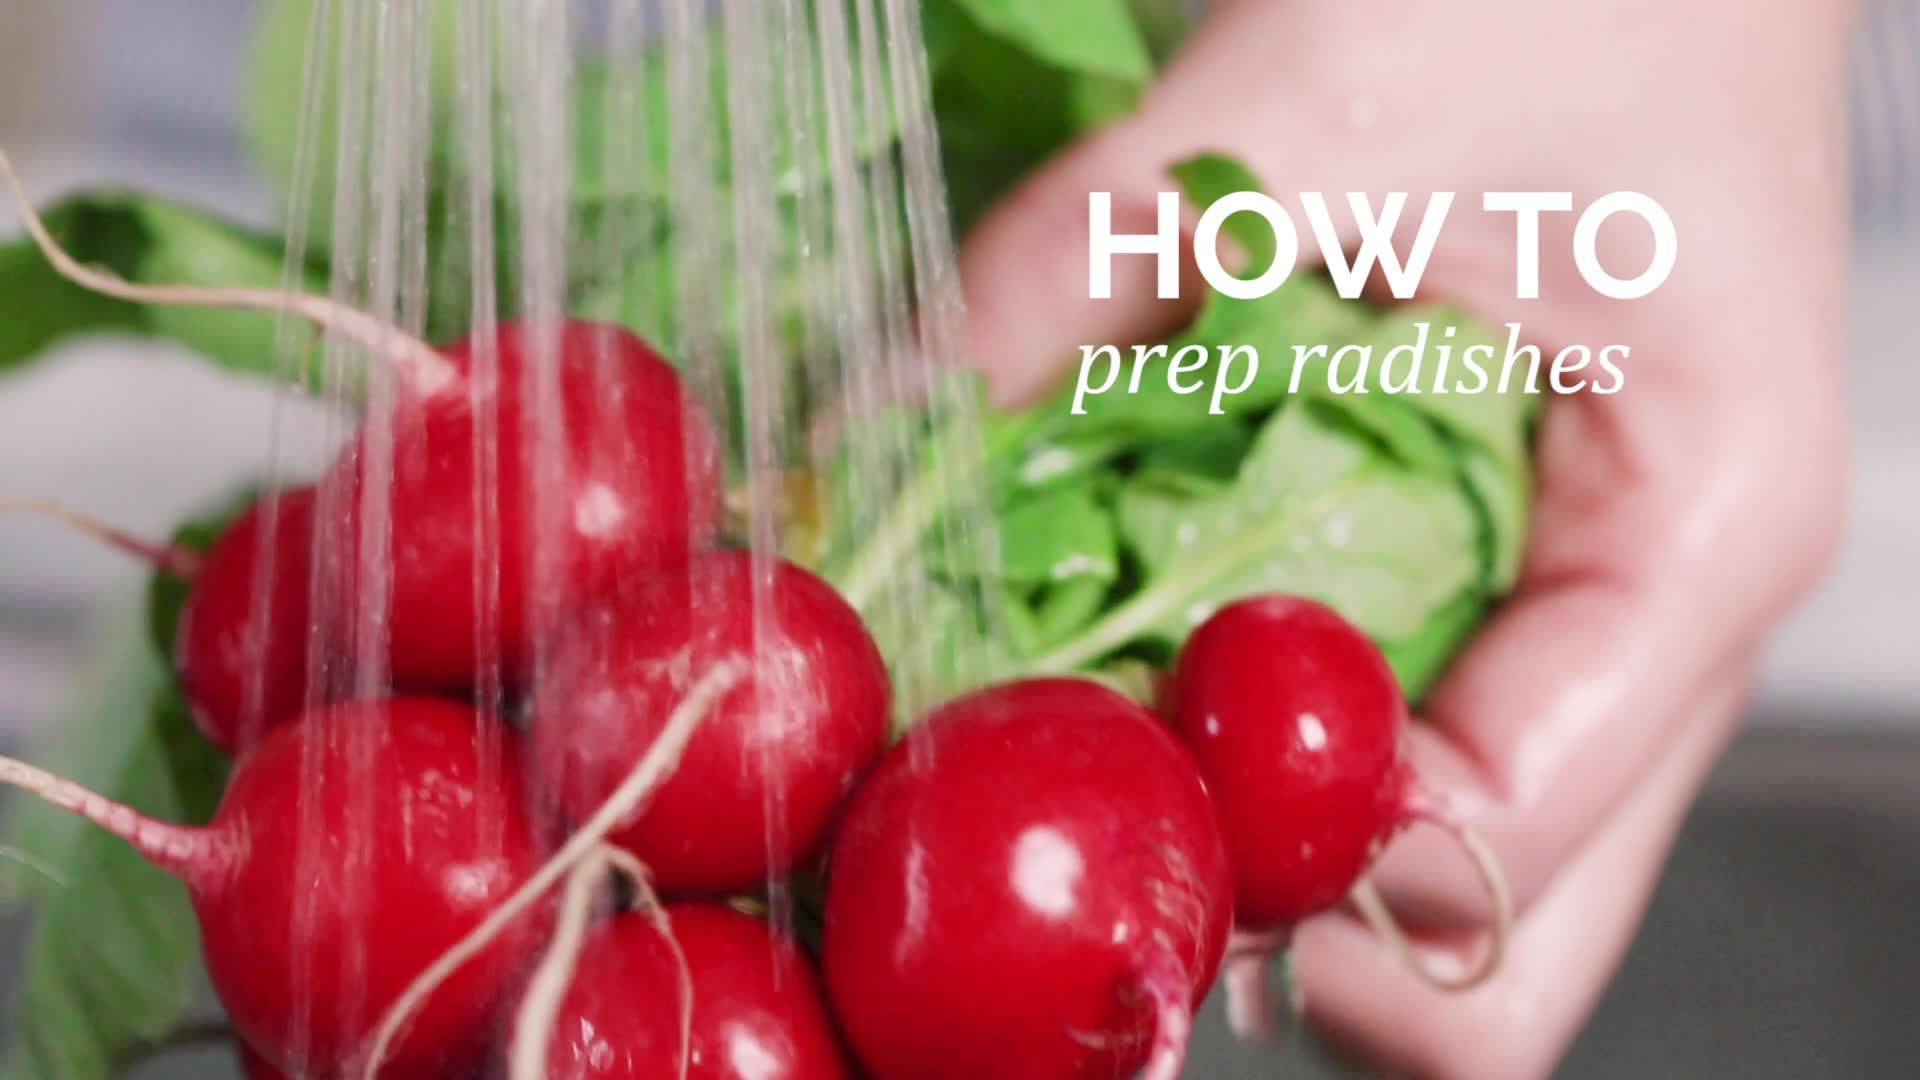 How to : Prep radishes